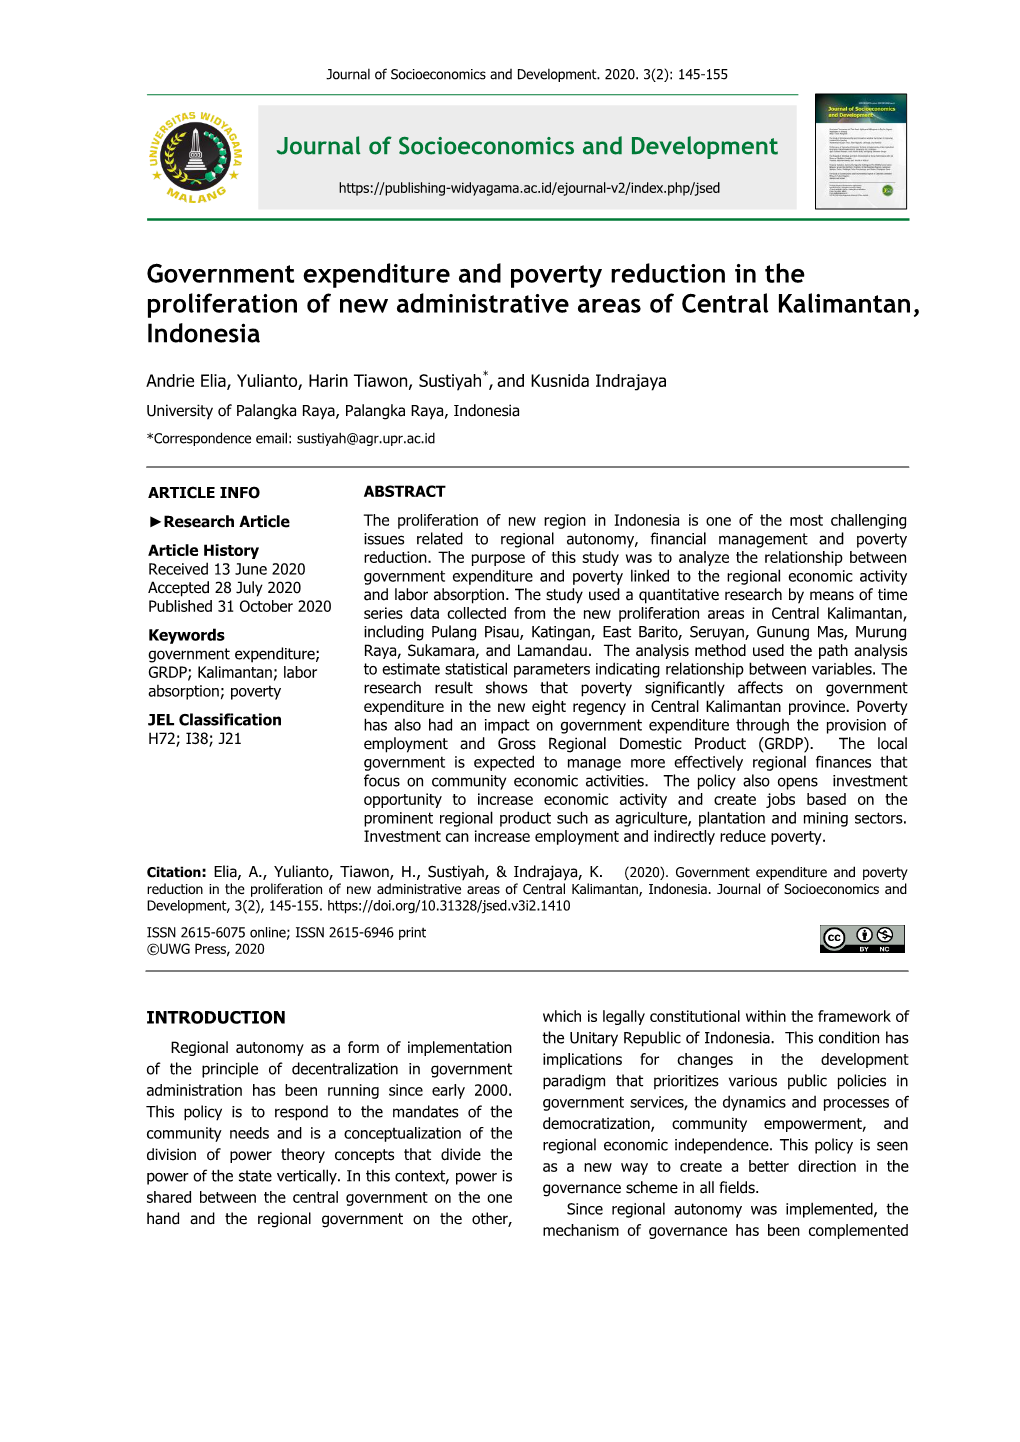 H., Sustiyah, & Indrajaya, K.(2020). Government Expenditure and Poverty Reduction in the Proliferation of New Administrative Areas of Central Kalimantan, Indonesia